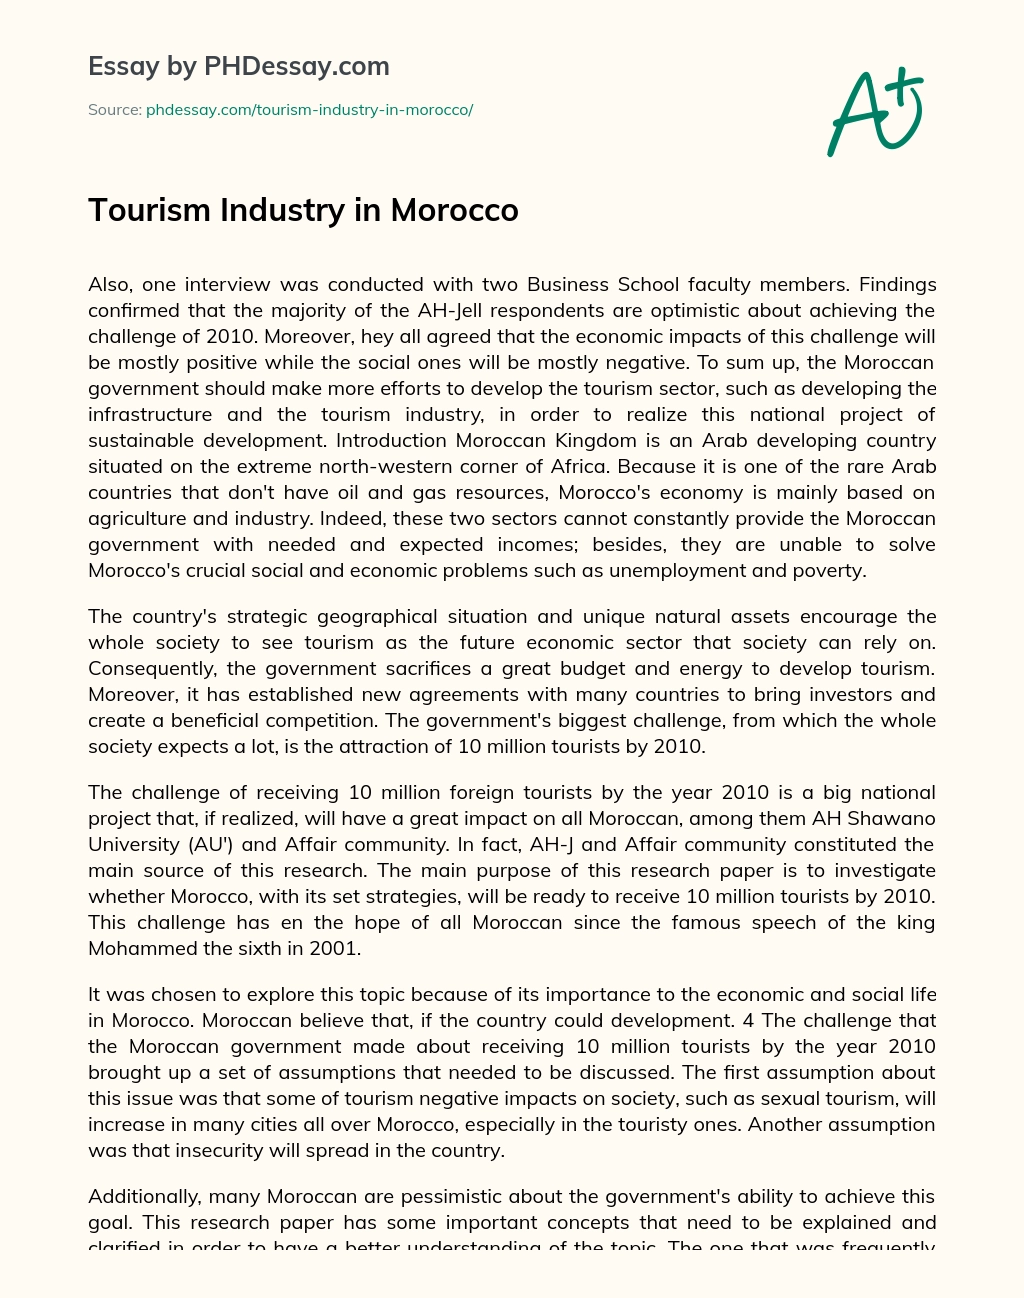 Tourism Industry in Morocco essay